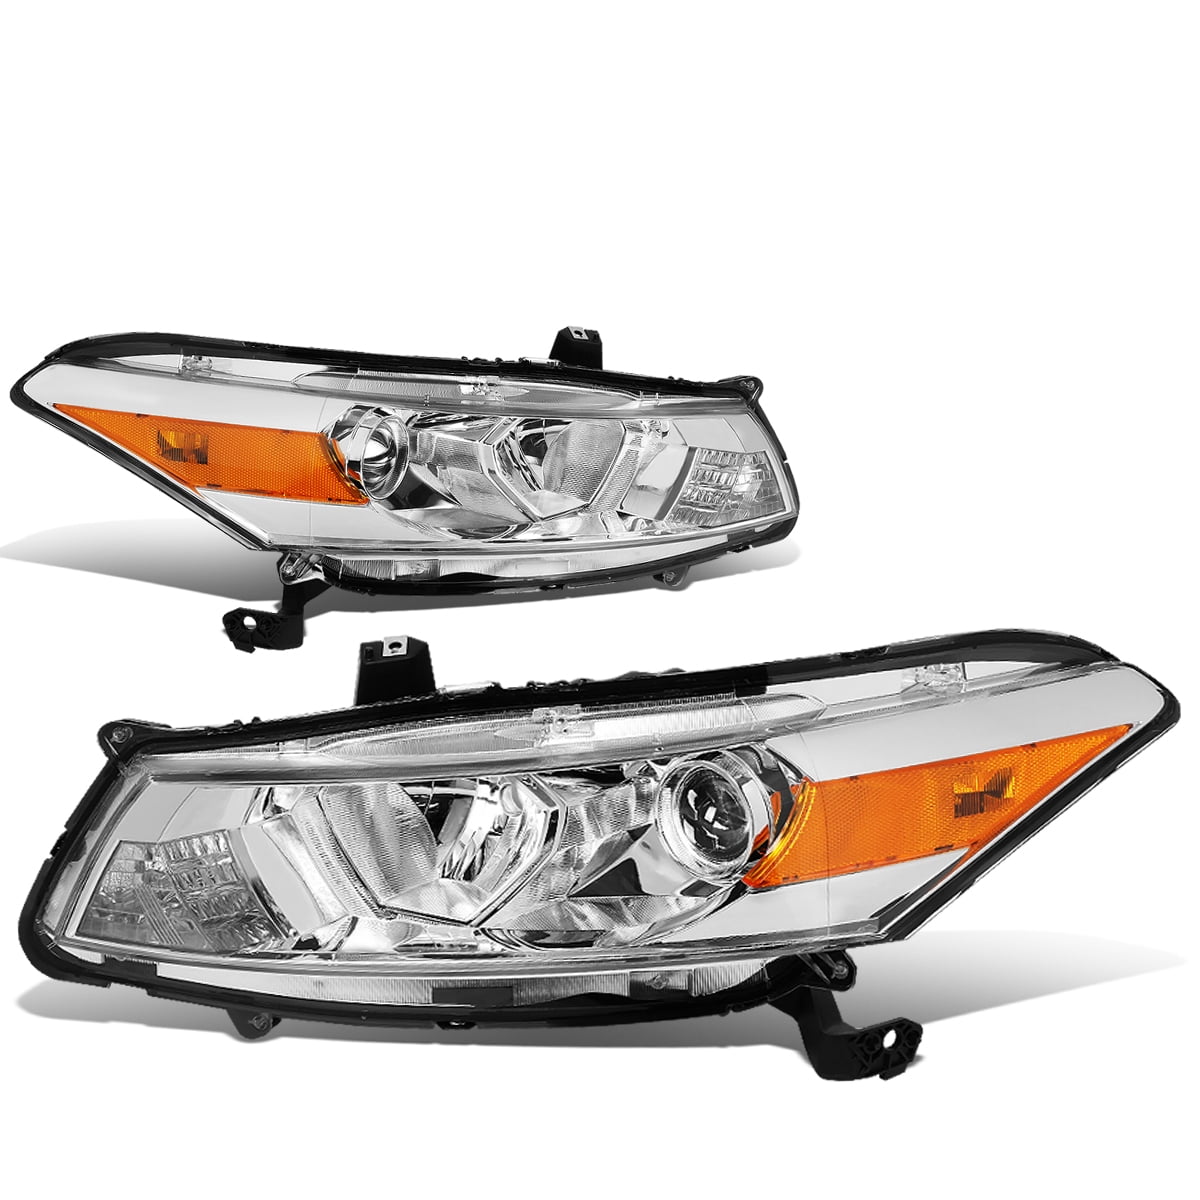 DNA Motoring HL-OH-HA082D-SM-AM-T2 Pair OE Style Front Driving Headlight/Lamp Set 